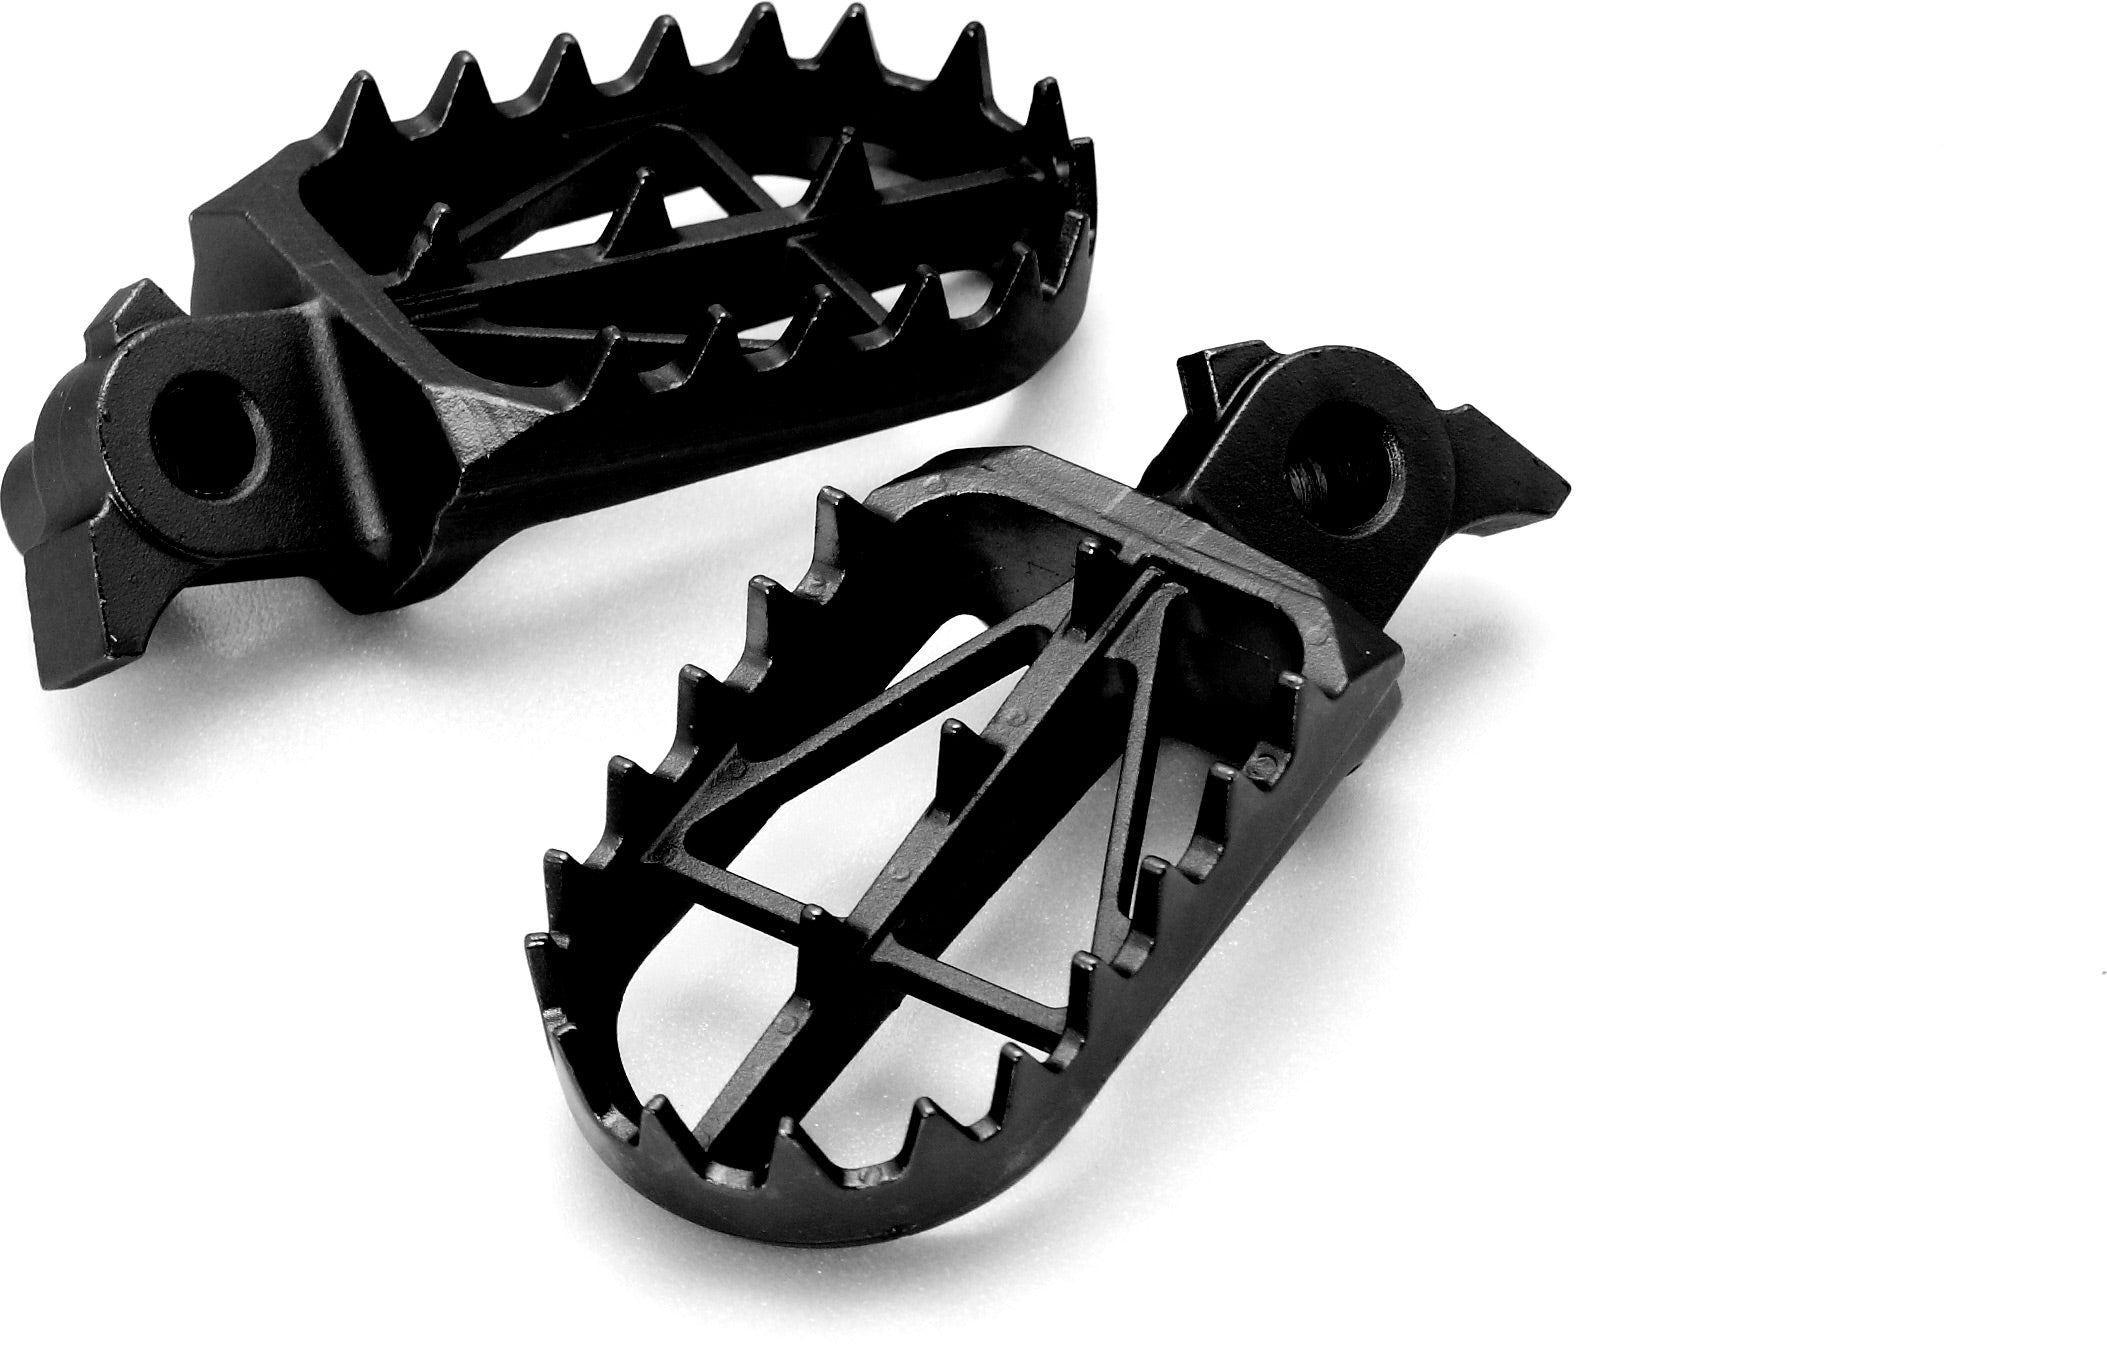 Ultra Wide foot pegs designed for KX250F and KX450F models, years 2009 to 2021, on white background